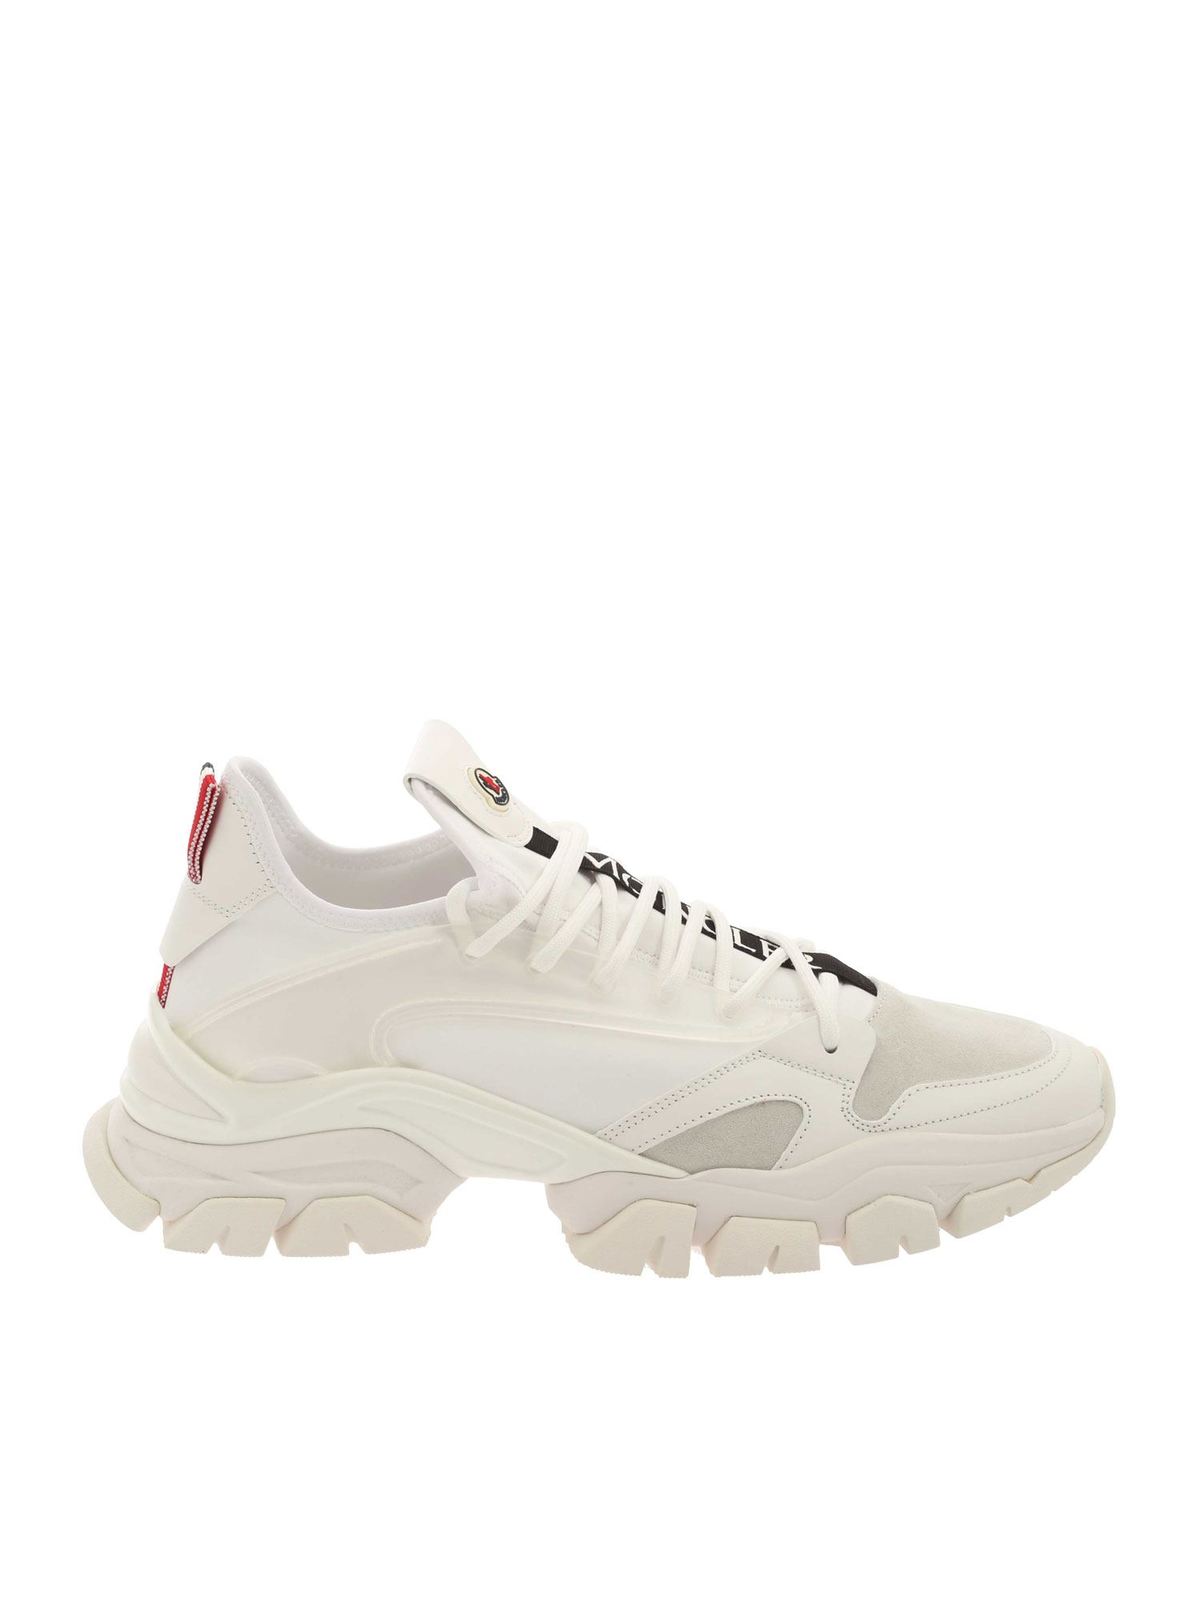 Trainers Moncler - Trevor sneakers in white - 4M7164002SHR001 | iKRIX.com